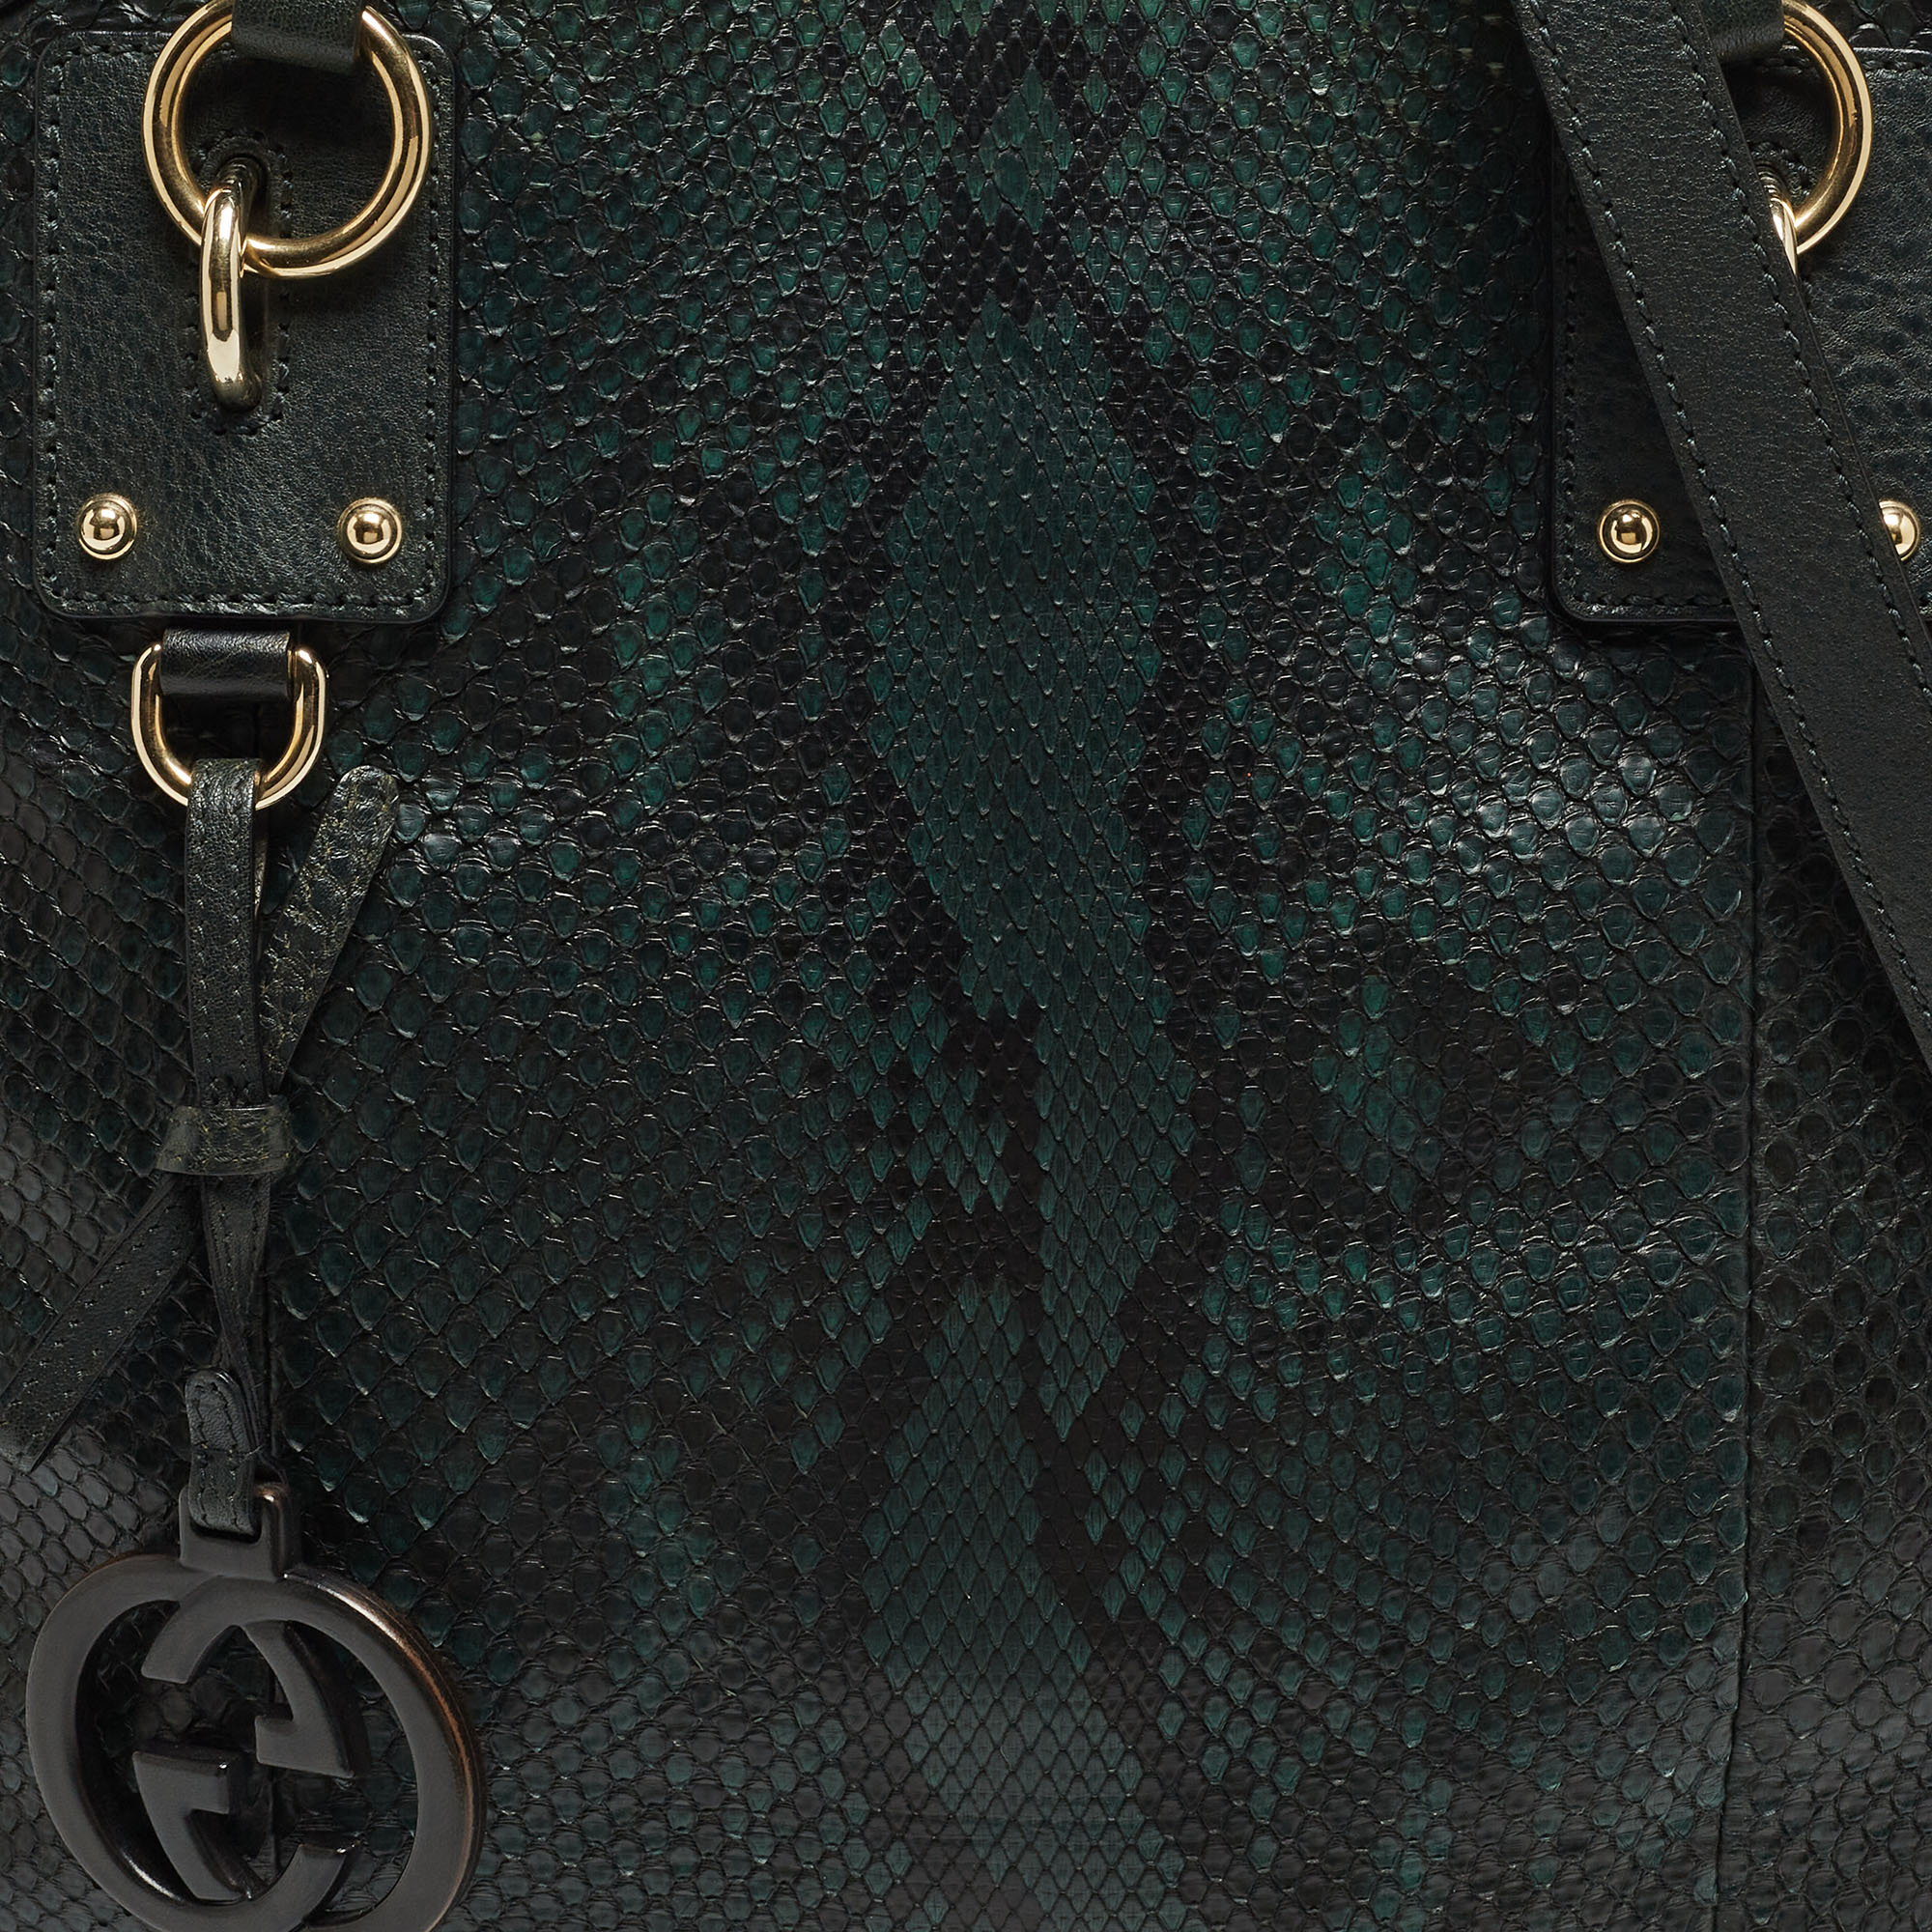 Gucci Green/Black Python Leather Convertible GG Charm Dome Satchel